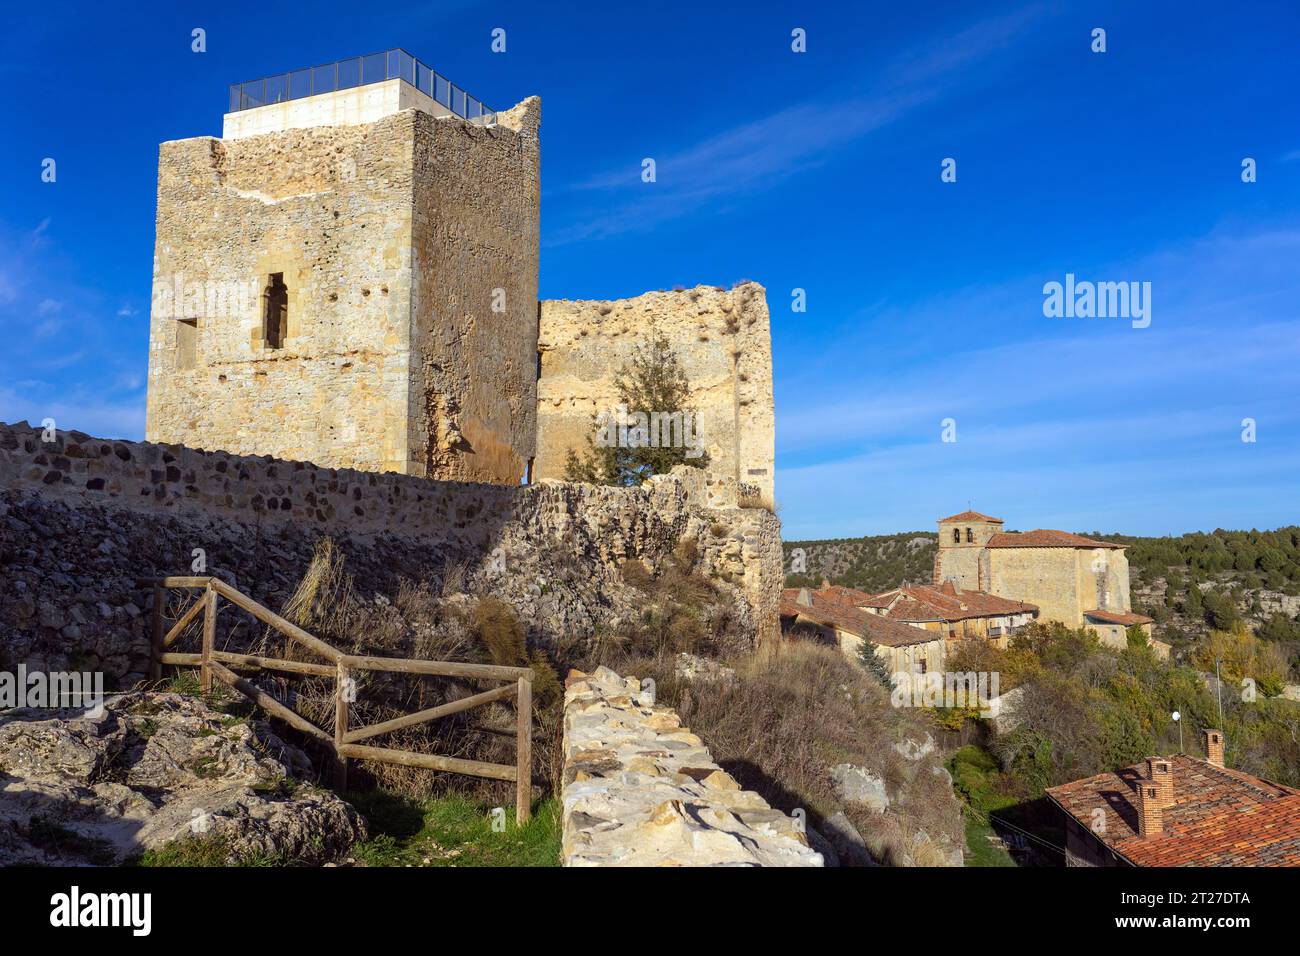 View of the castle and the church of the medieval village of Calatañazor in a sunny day, Soria, Castilla y Leo Stock Photo